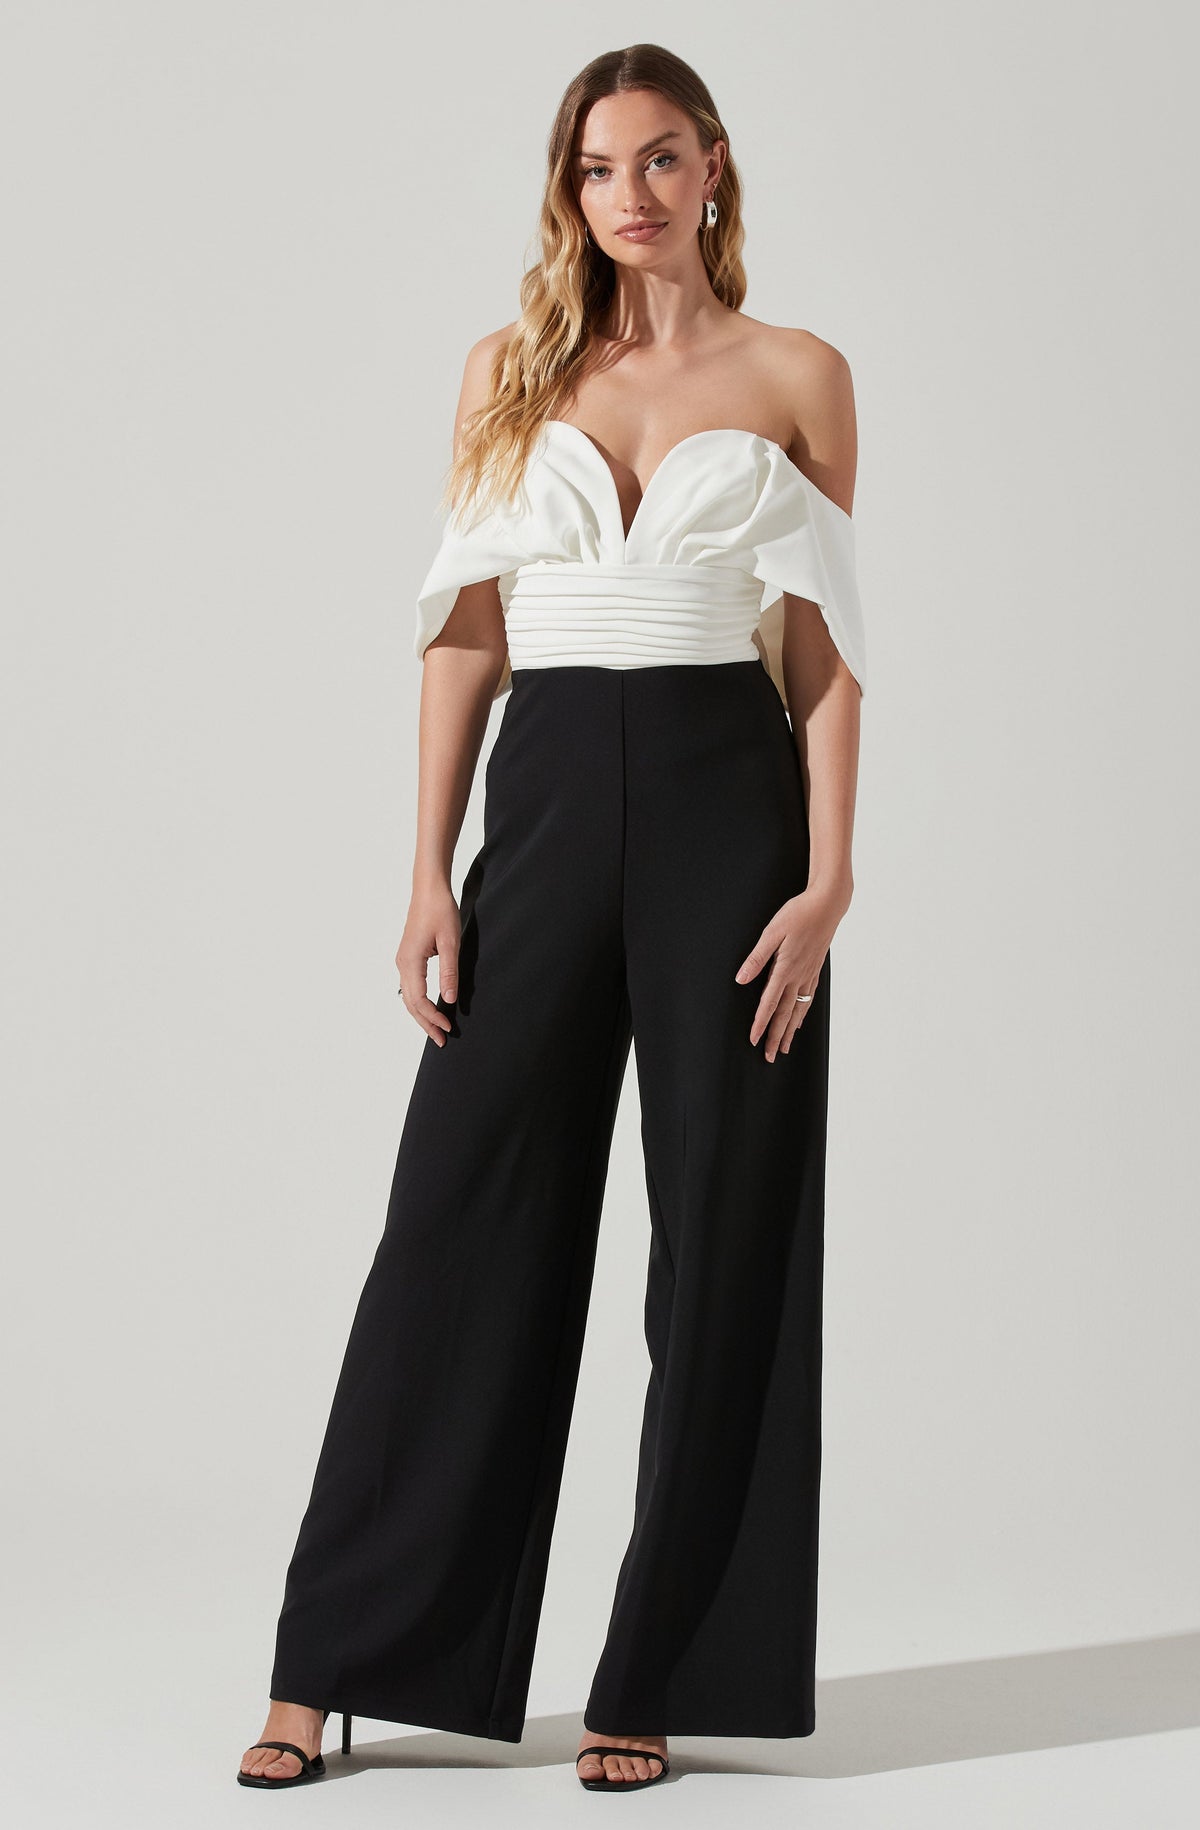 Clearance Under $5 Clothing,POROPL Loose Wide Leg High Waist